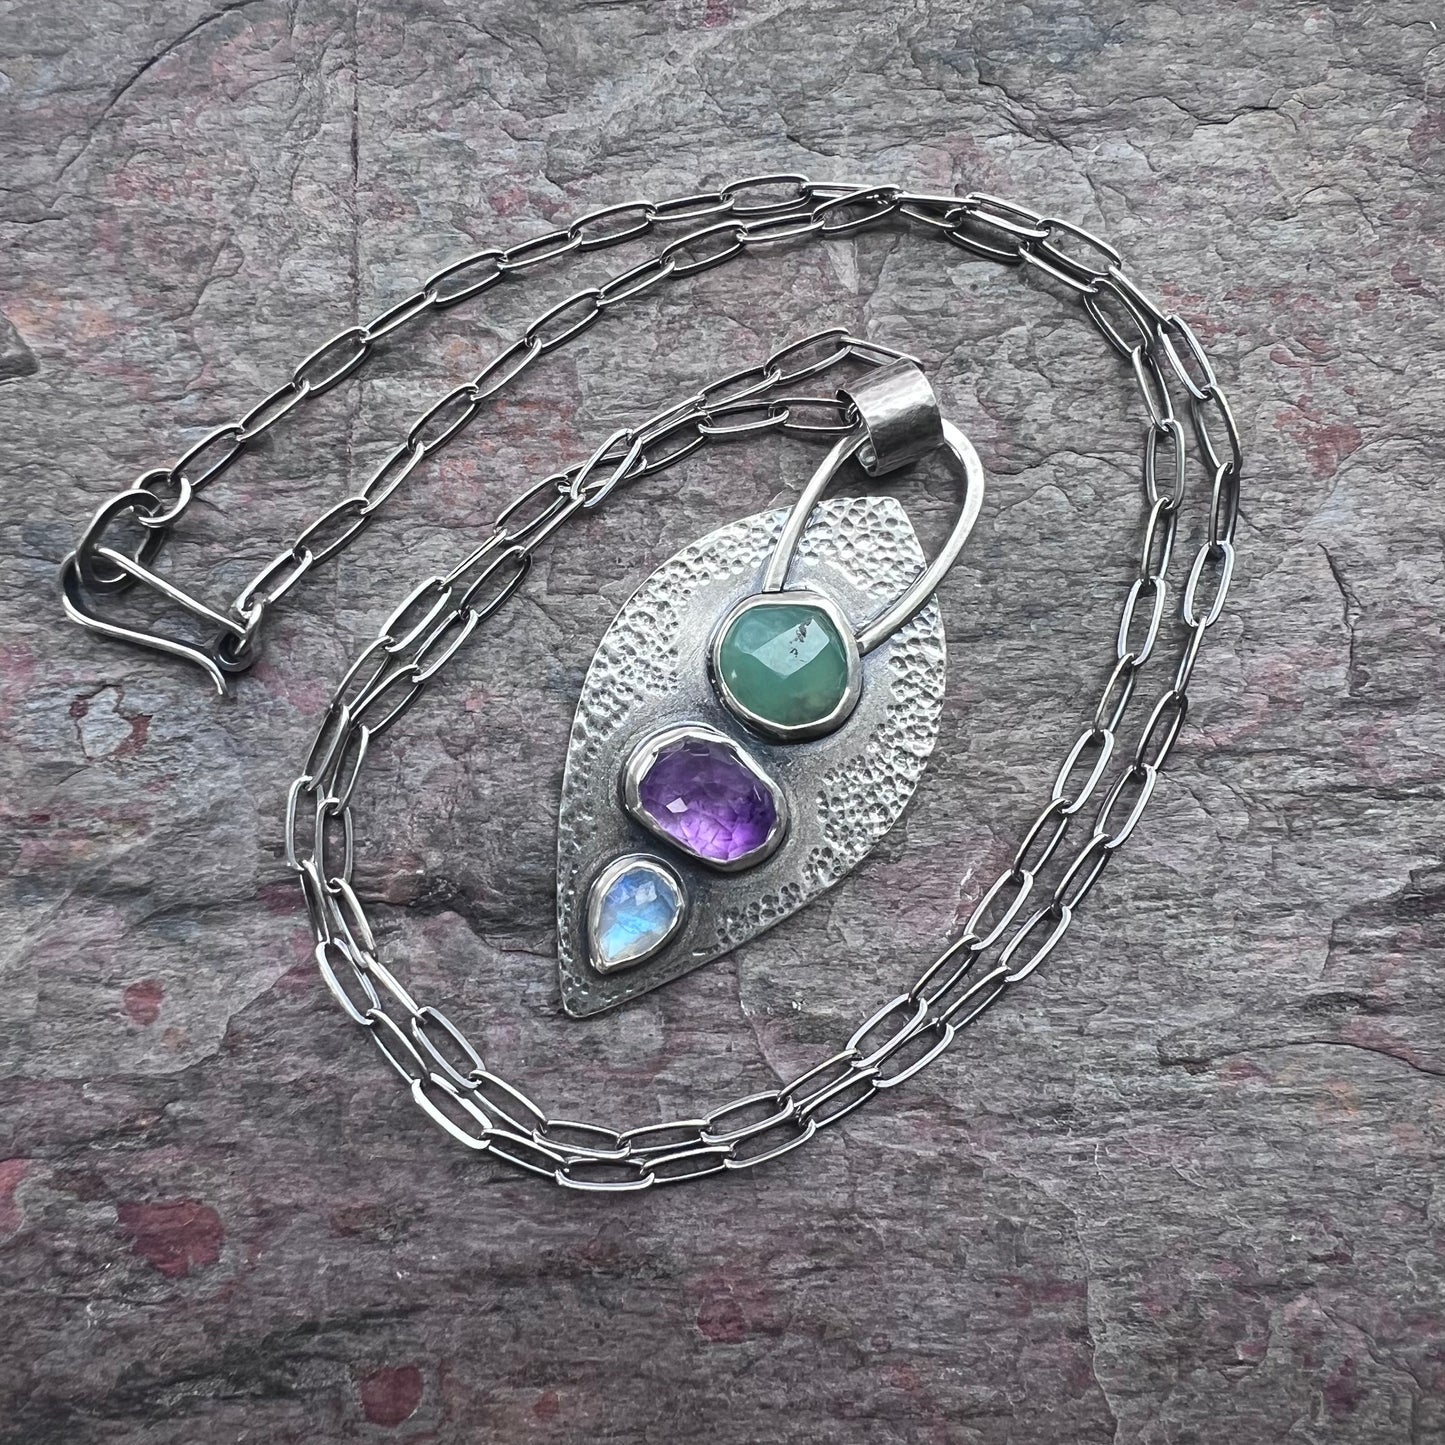 Chrysoprase, Amethyst, and Rainbow Moonstone Sterling Silver Necklace - Handmade One-of-a-kind Pendant on Sterling Silver Chain